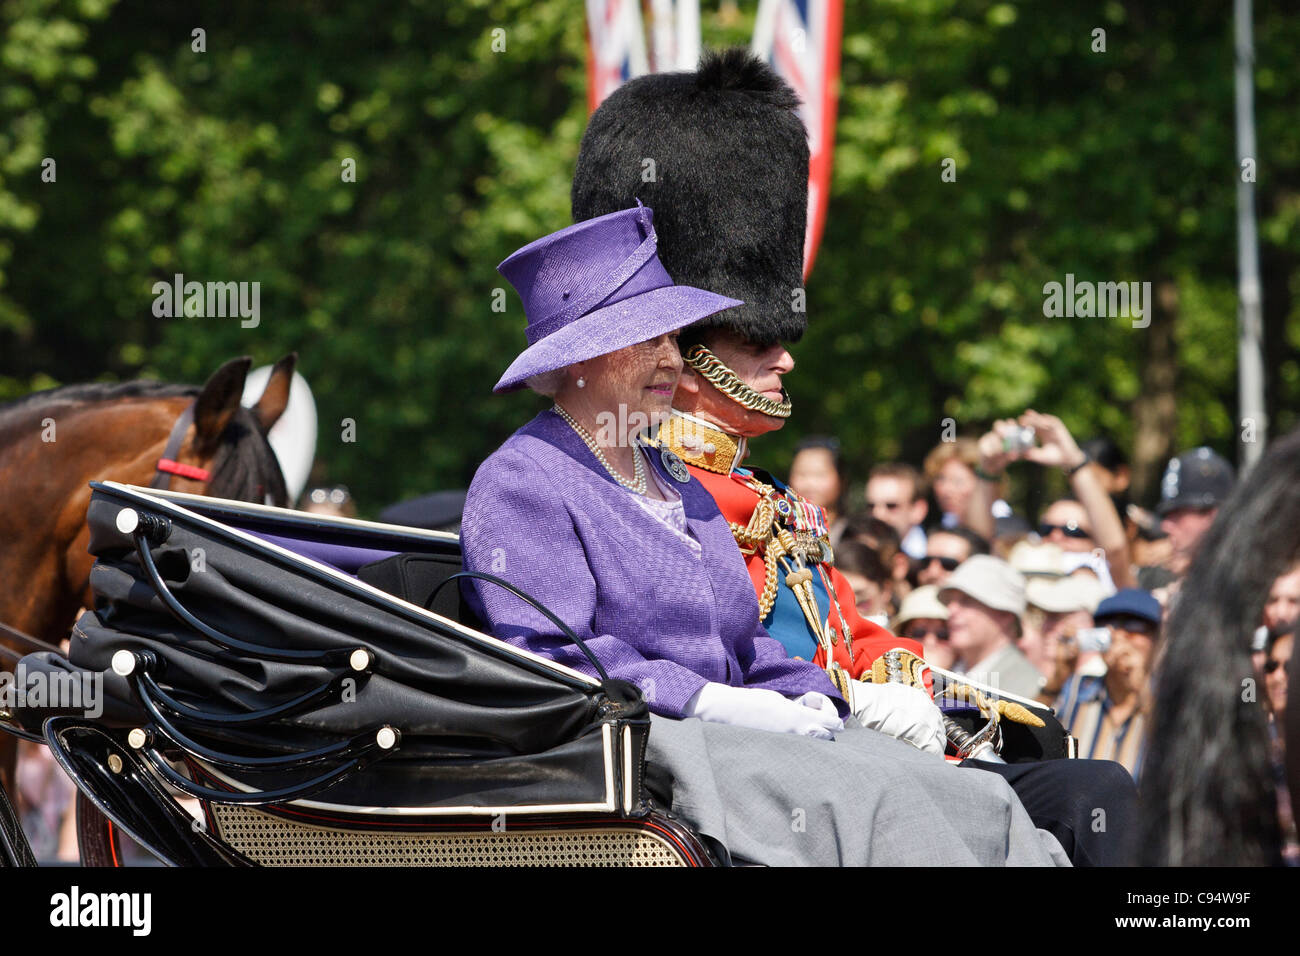 Queen Elizabeth II and Prince Philip traveling by horse carriage to Buckingham Palace during the Trooping the Colour. Stock Photo